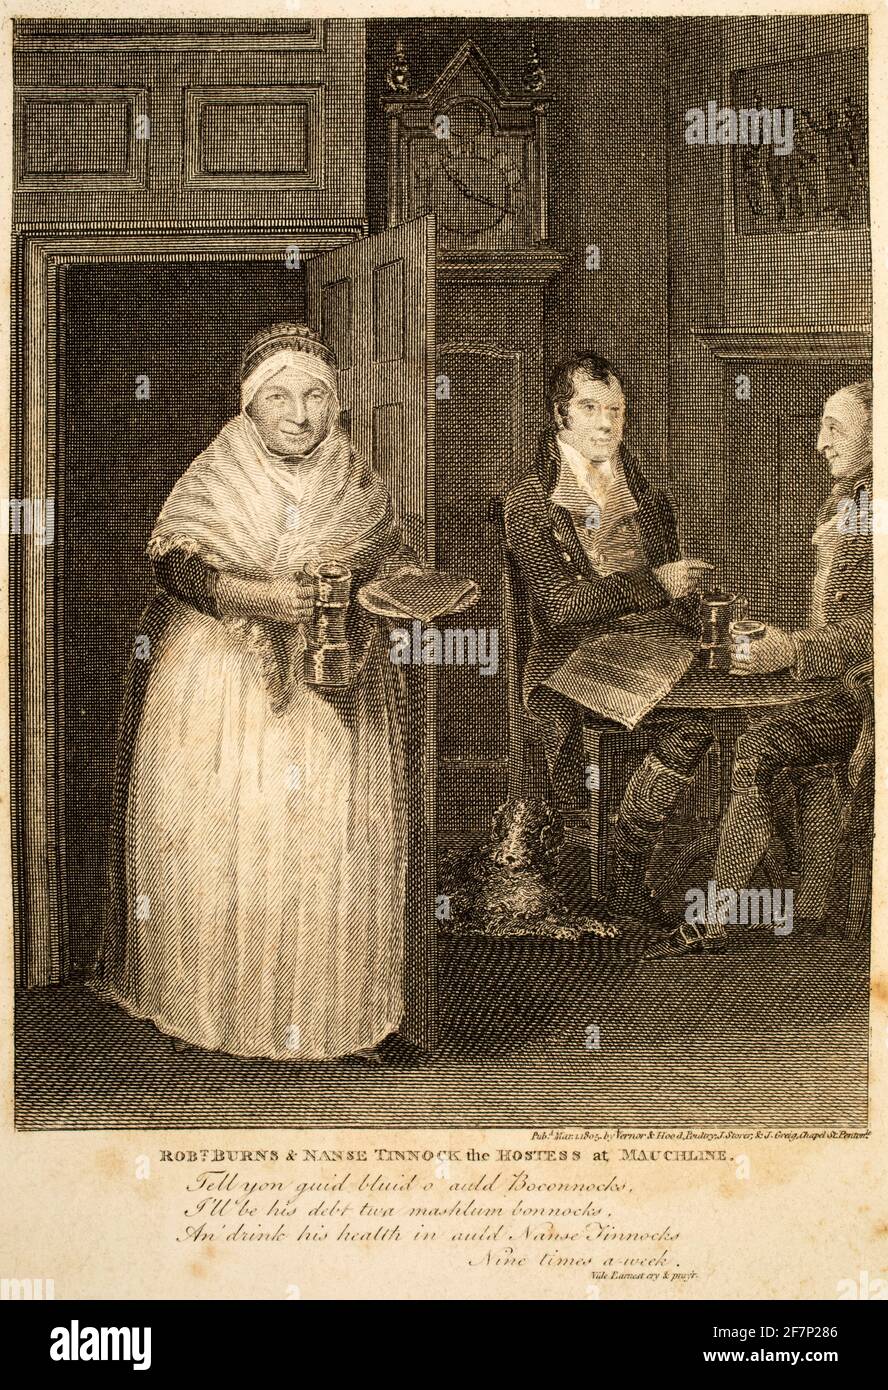 1805 original engraving of Robt Burns and Nanse Tinnock, hostess at Mauchline, from 1811 Views in North Britain, illustrative of the works of Robert B Stock Photo